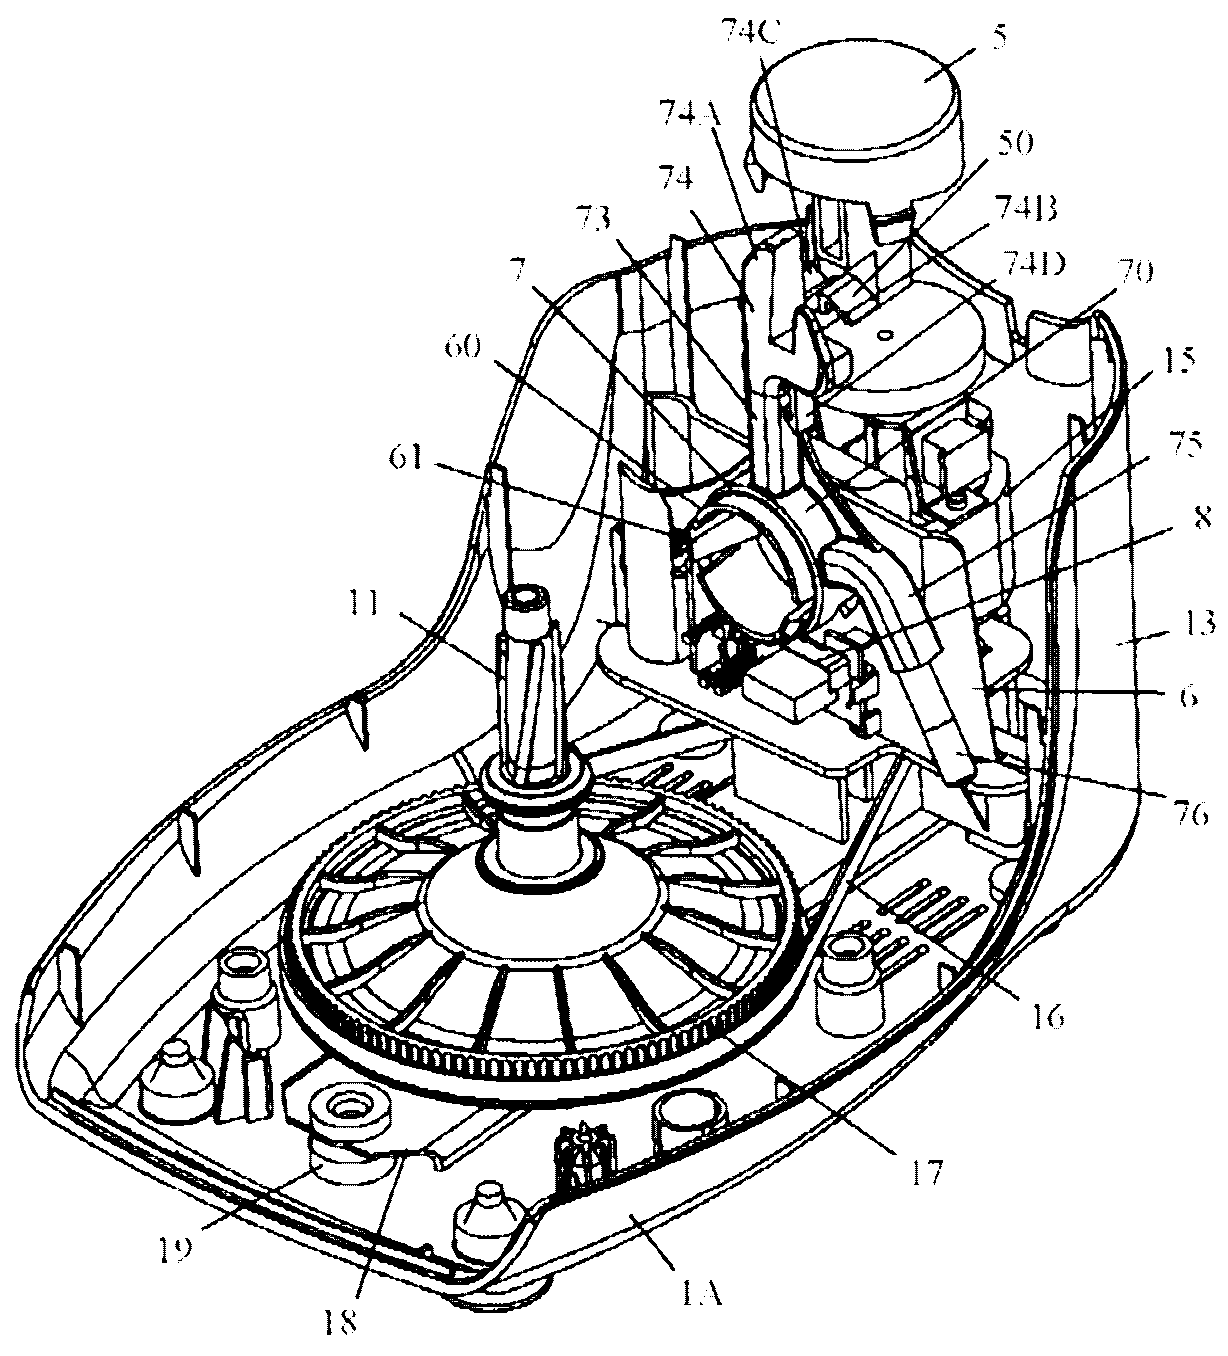 Household cooking appliance comprising a receptacle containing a motor driven cutting tool